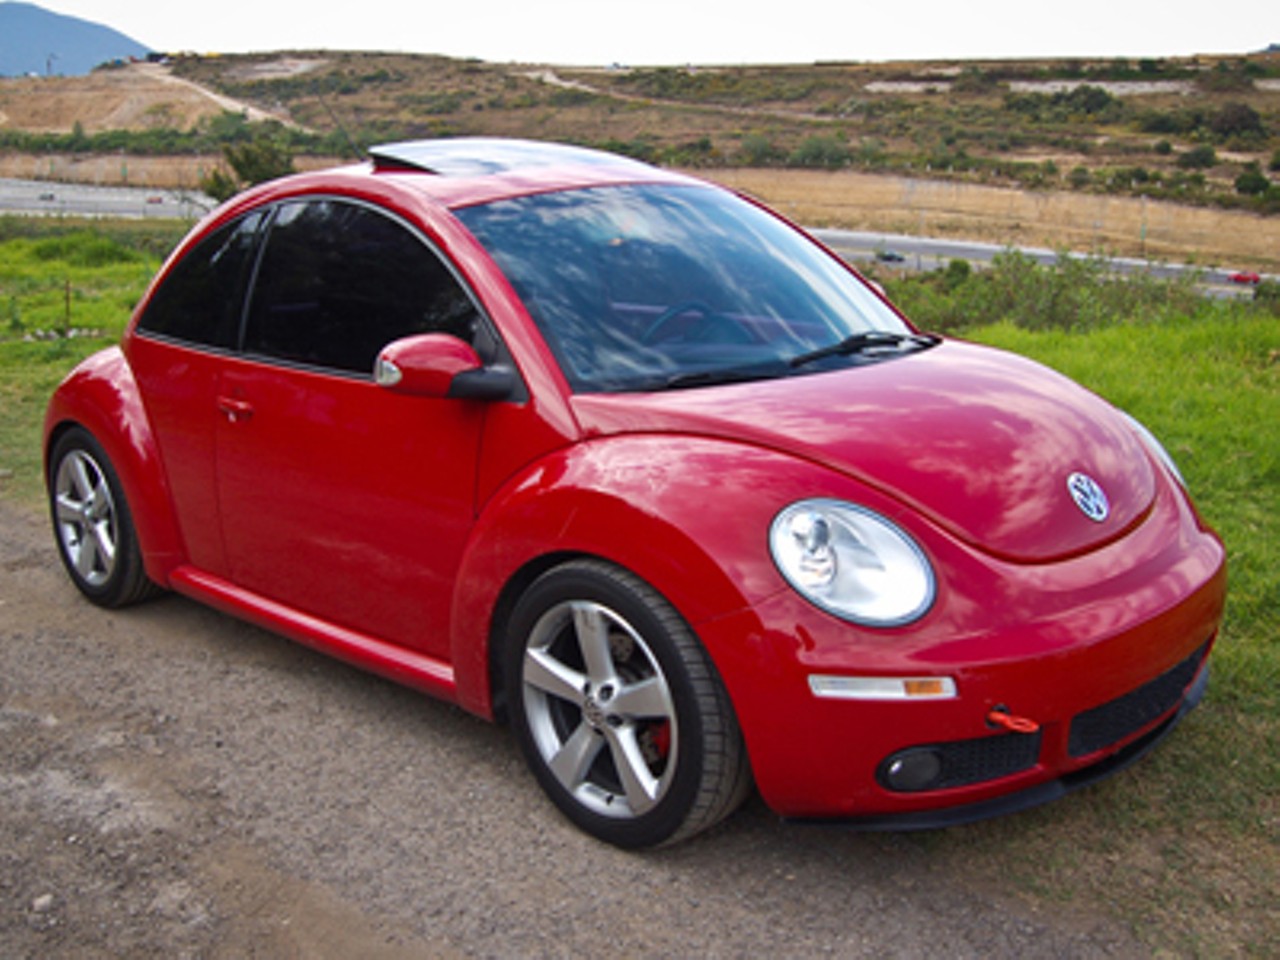 Volkswagen New Beetle
Perhaps the biggest cult car of them all, the Volkswagen Beetle. It went from being known as the "People's Car" to a hip favorite after the introduction of the New Beetle in 1994. After its debut to U.S. buyers in 1998, new generations of drivers have been strangely in love with this bubble of a car. Read Paul Knight's Prius feature: "Wild Rides."